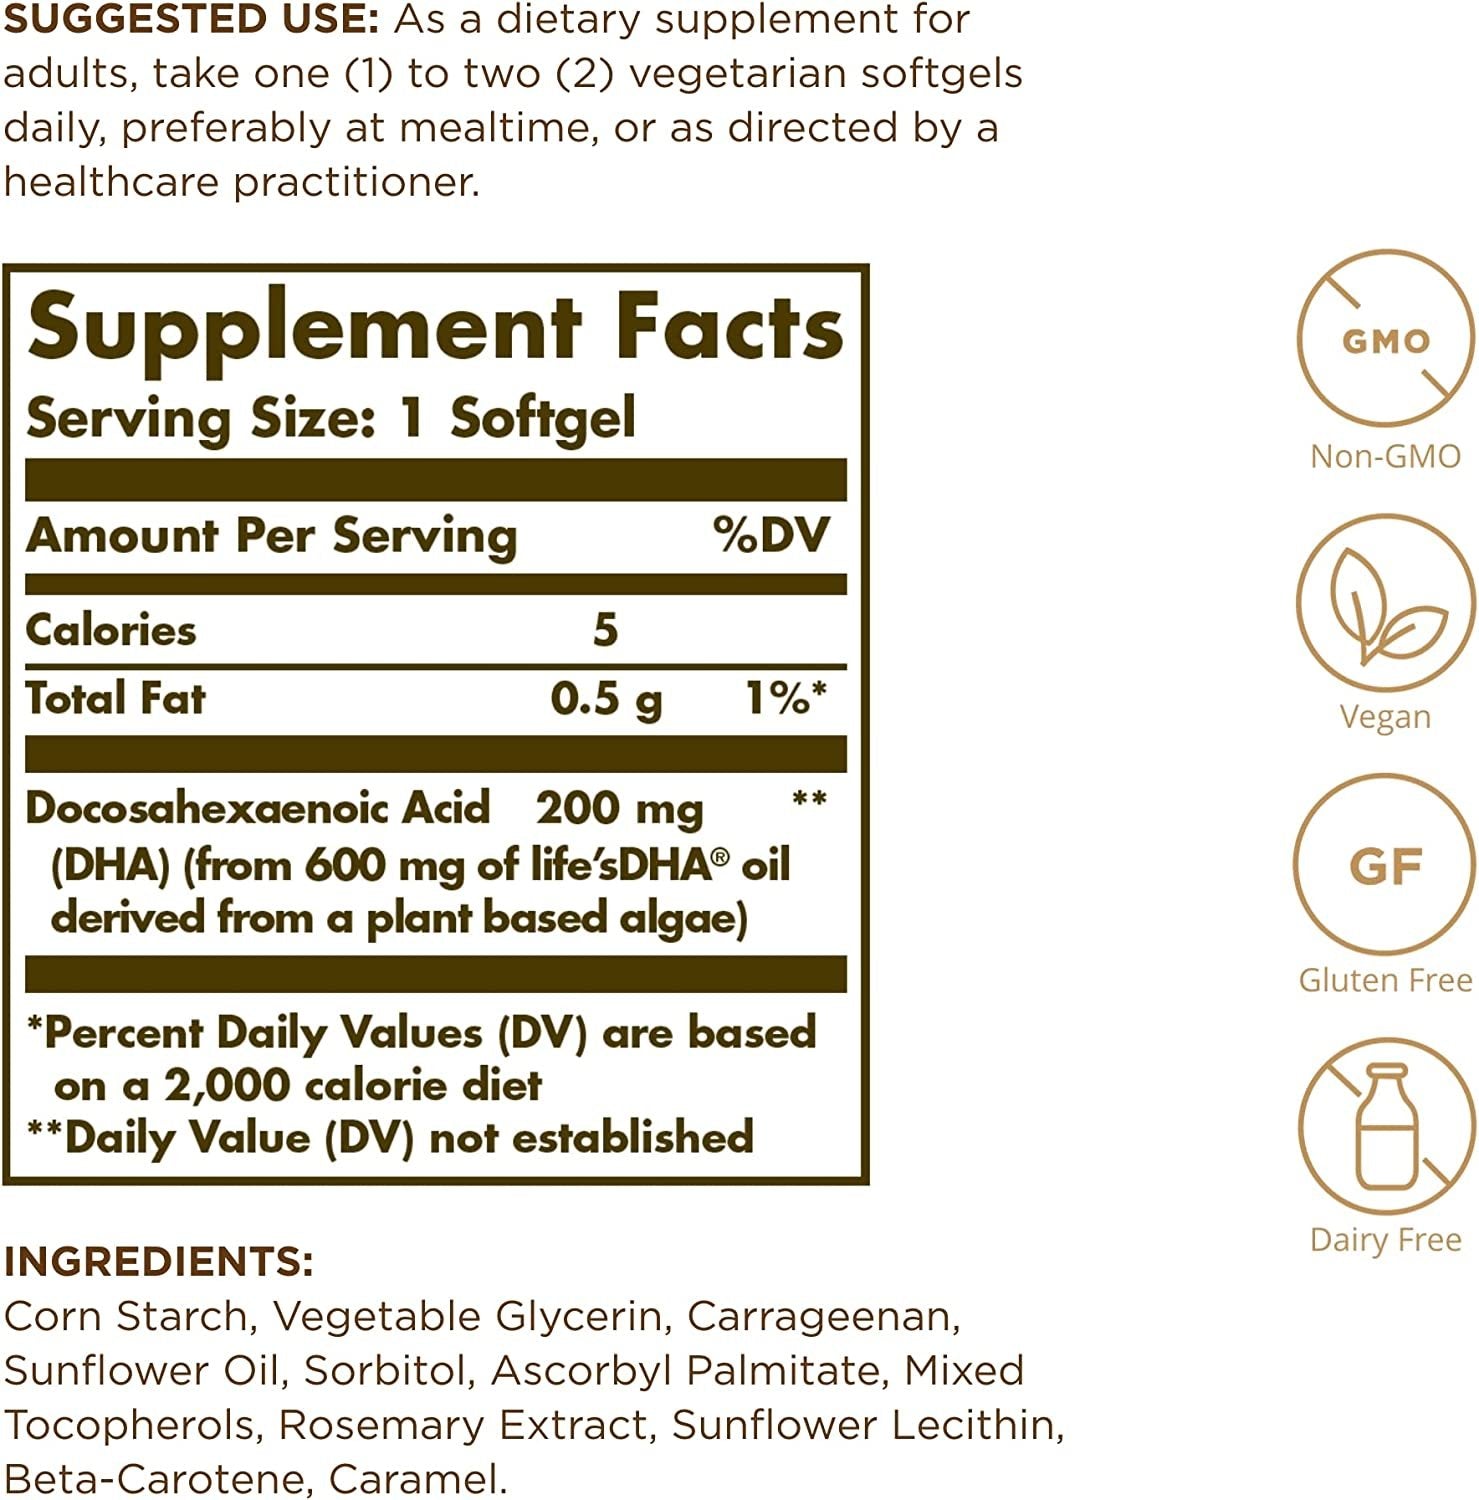 Solgar Omega-3 Vegetarian DHA 200 mg Vegetarian, 50 Softgels - Support for Cardiovascular, Joint & Skin Health - Contains DHA-Rich Algal Oil - Vegan, Gluten Free, Dairy Free - 50 Servings